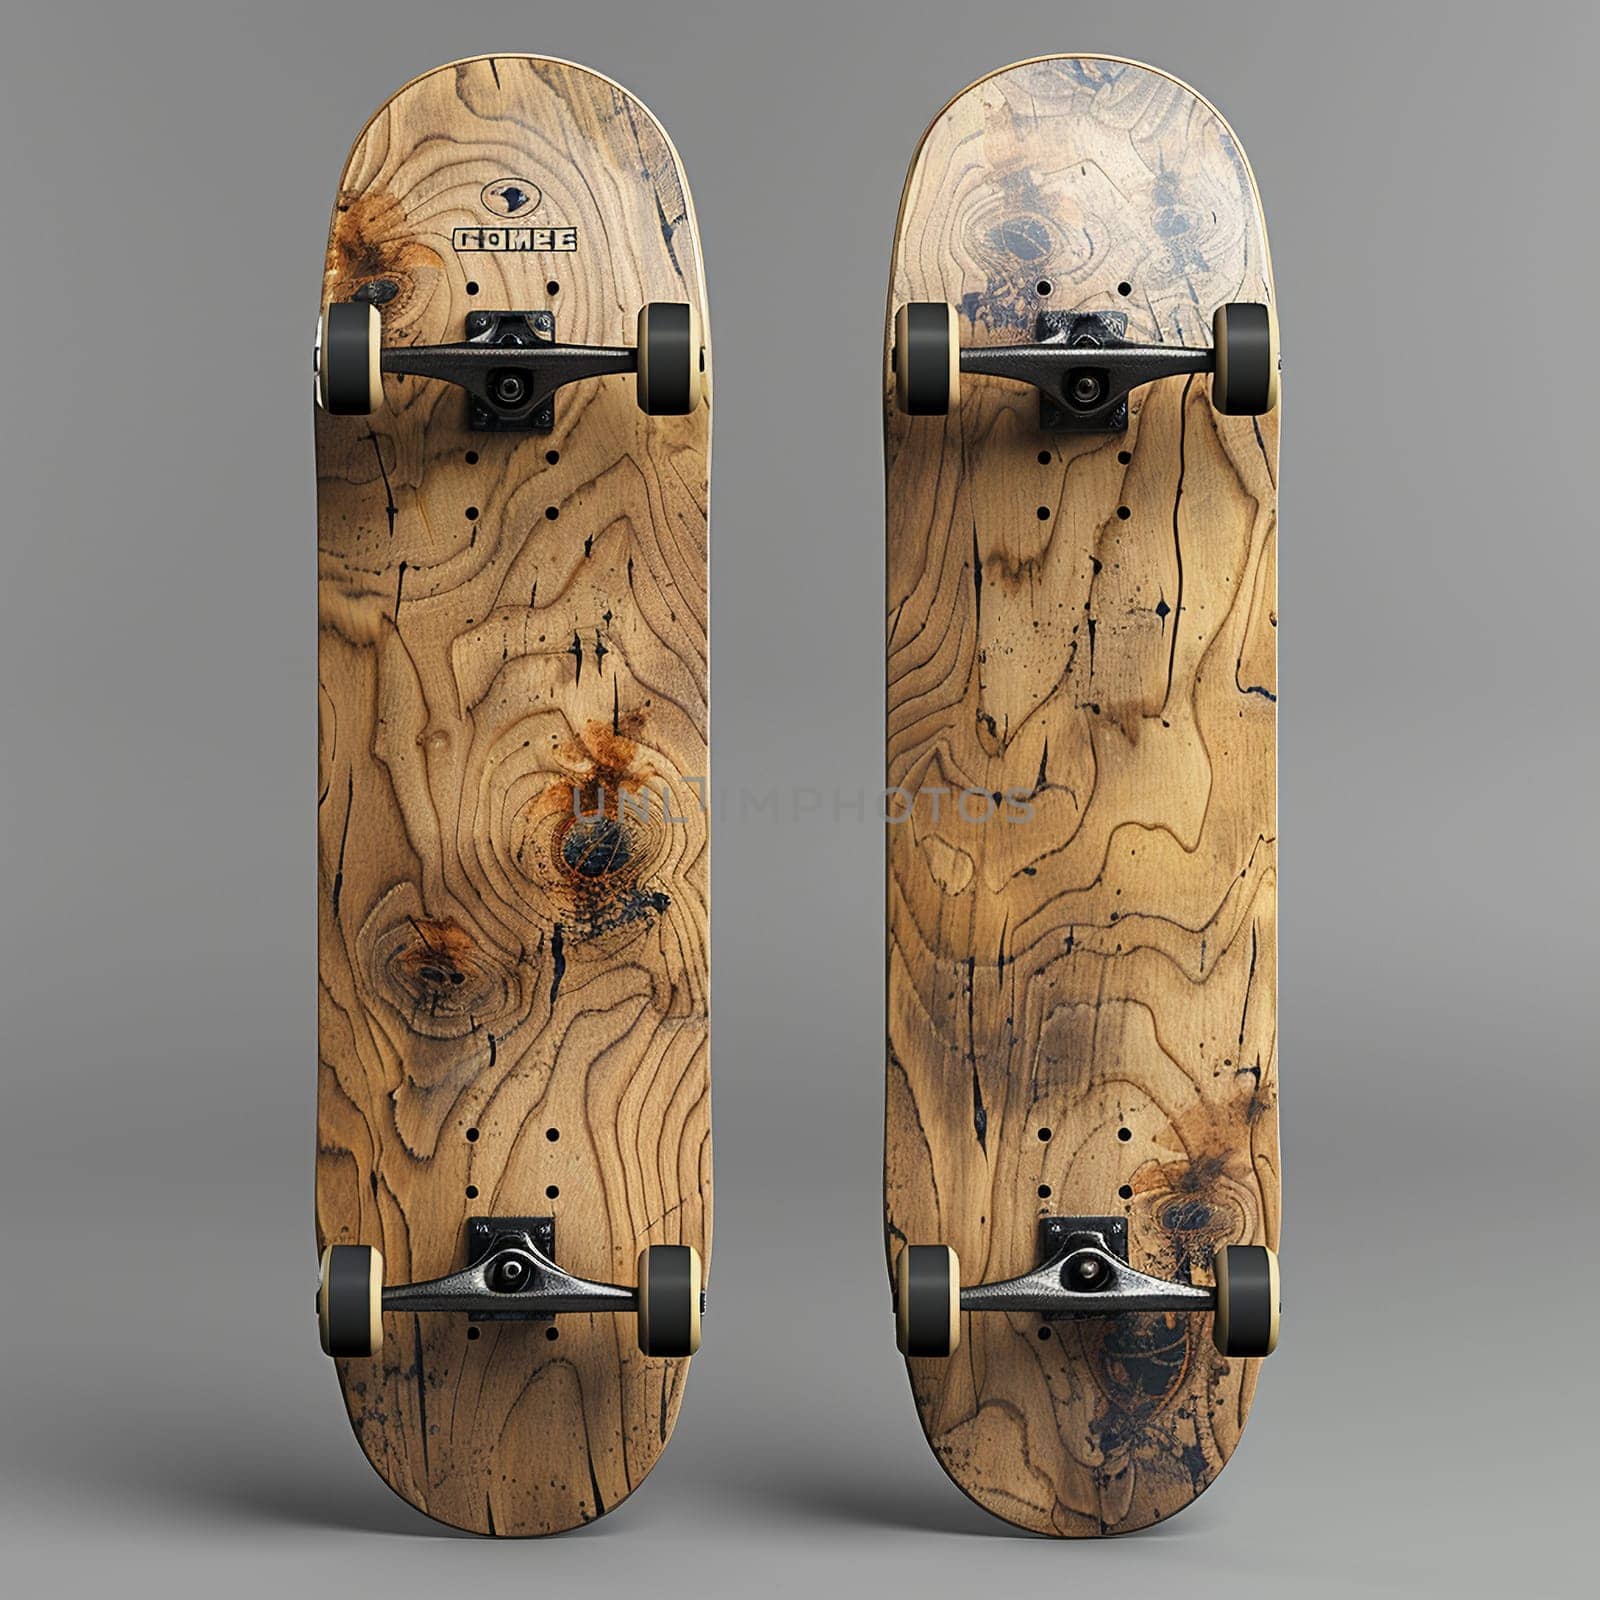 Clean Skateboard Mockup by Benzoix